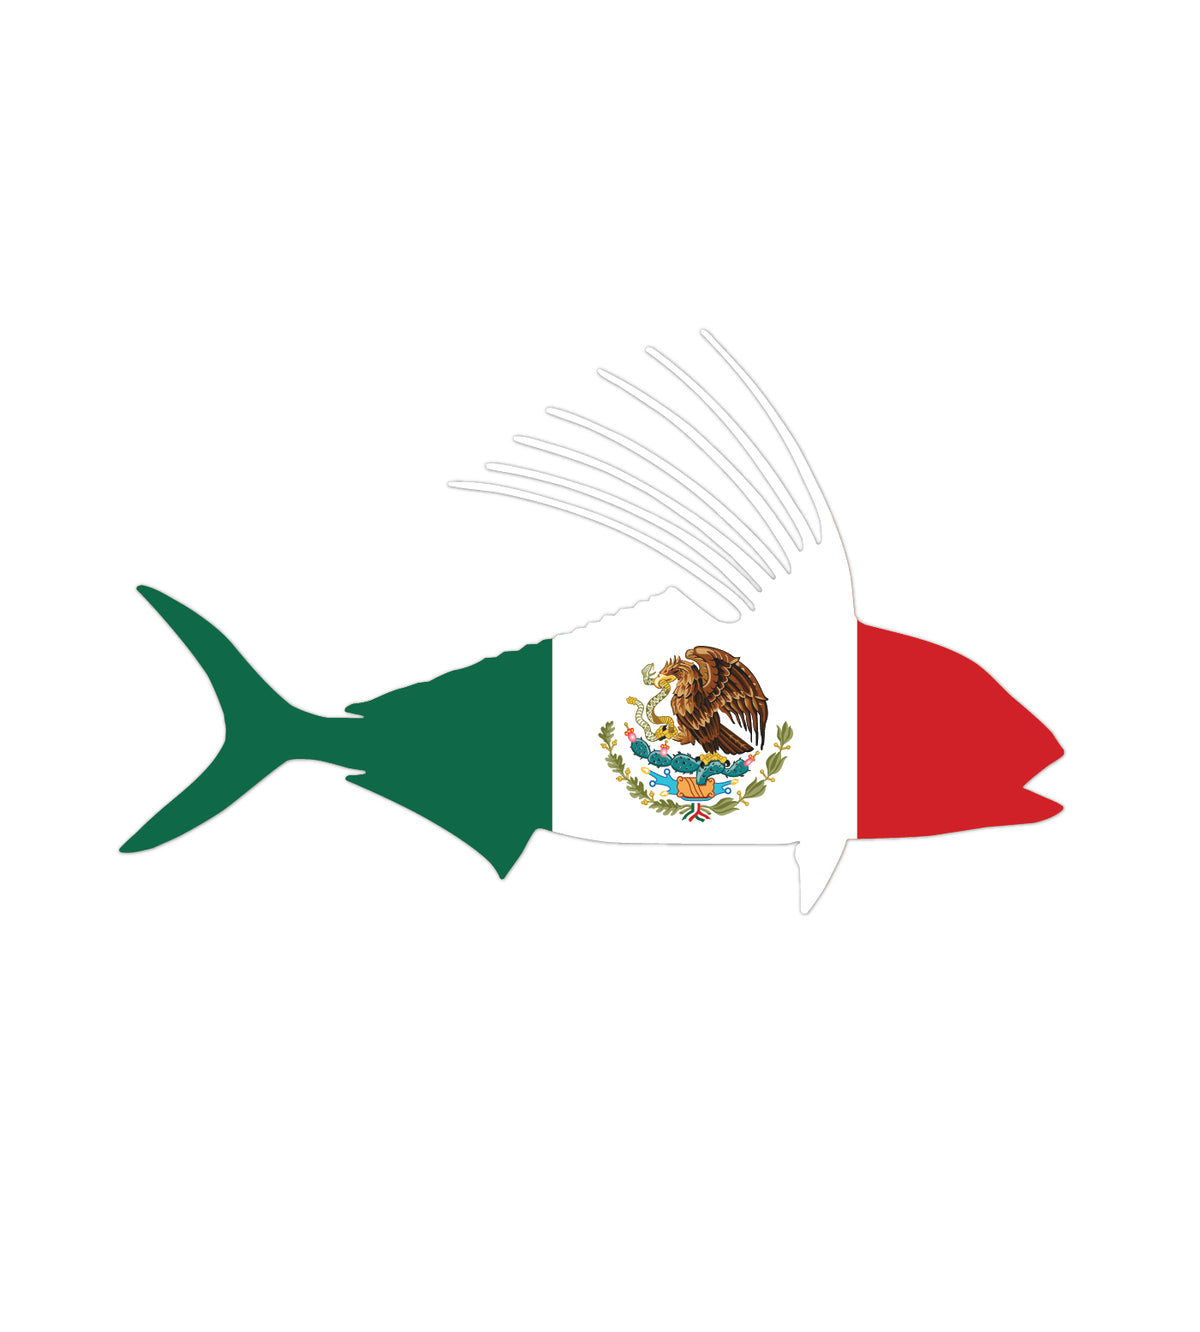 Mexico Roosterfish Sticker Mykiss Buy Now Mexico Roosterfish Sticker Mykiss